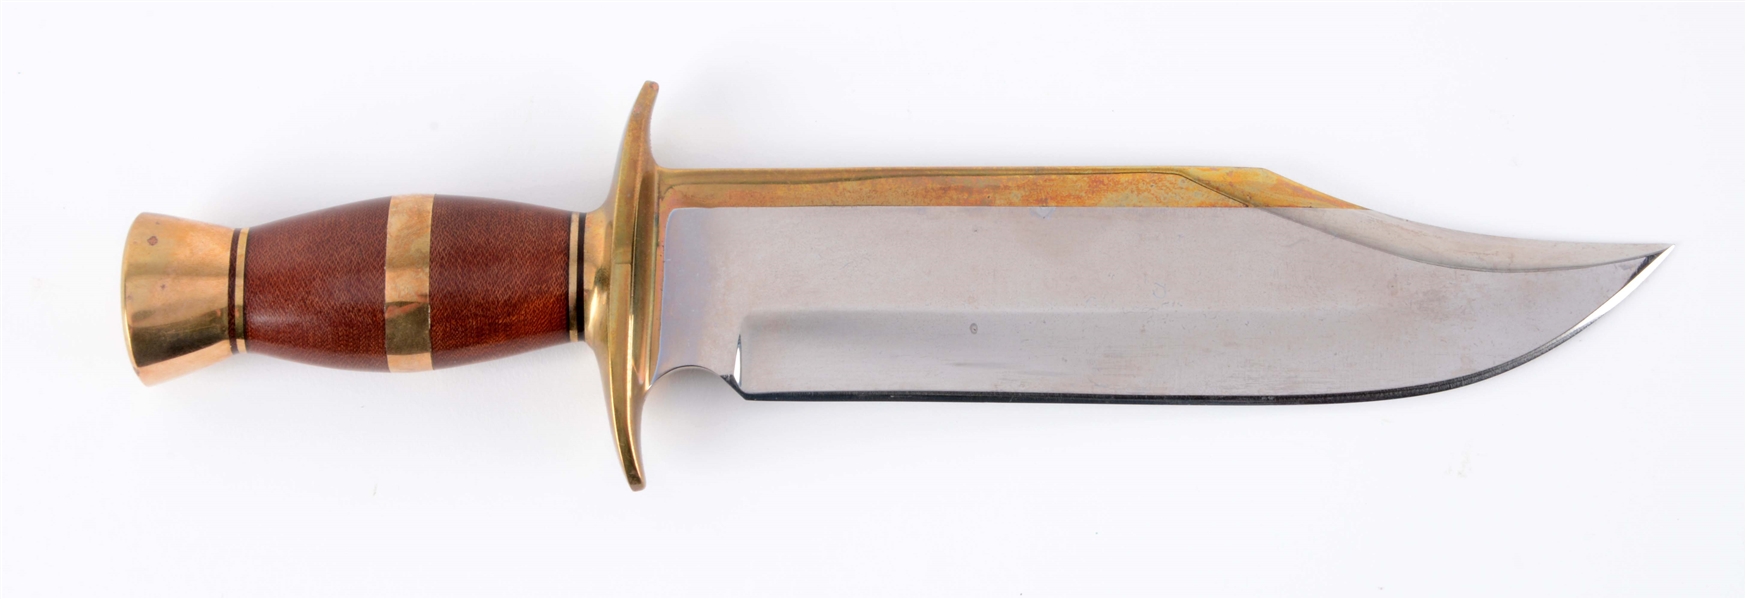 J.N. COOPER NAGLE BOWIE WITH BRASS BACK.